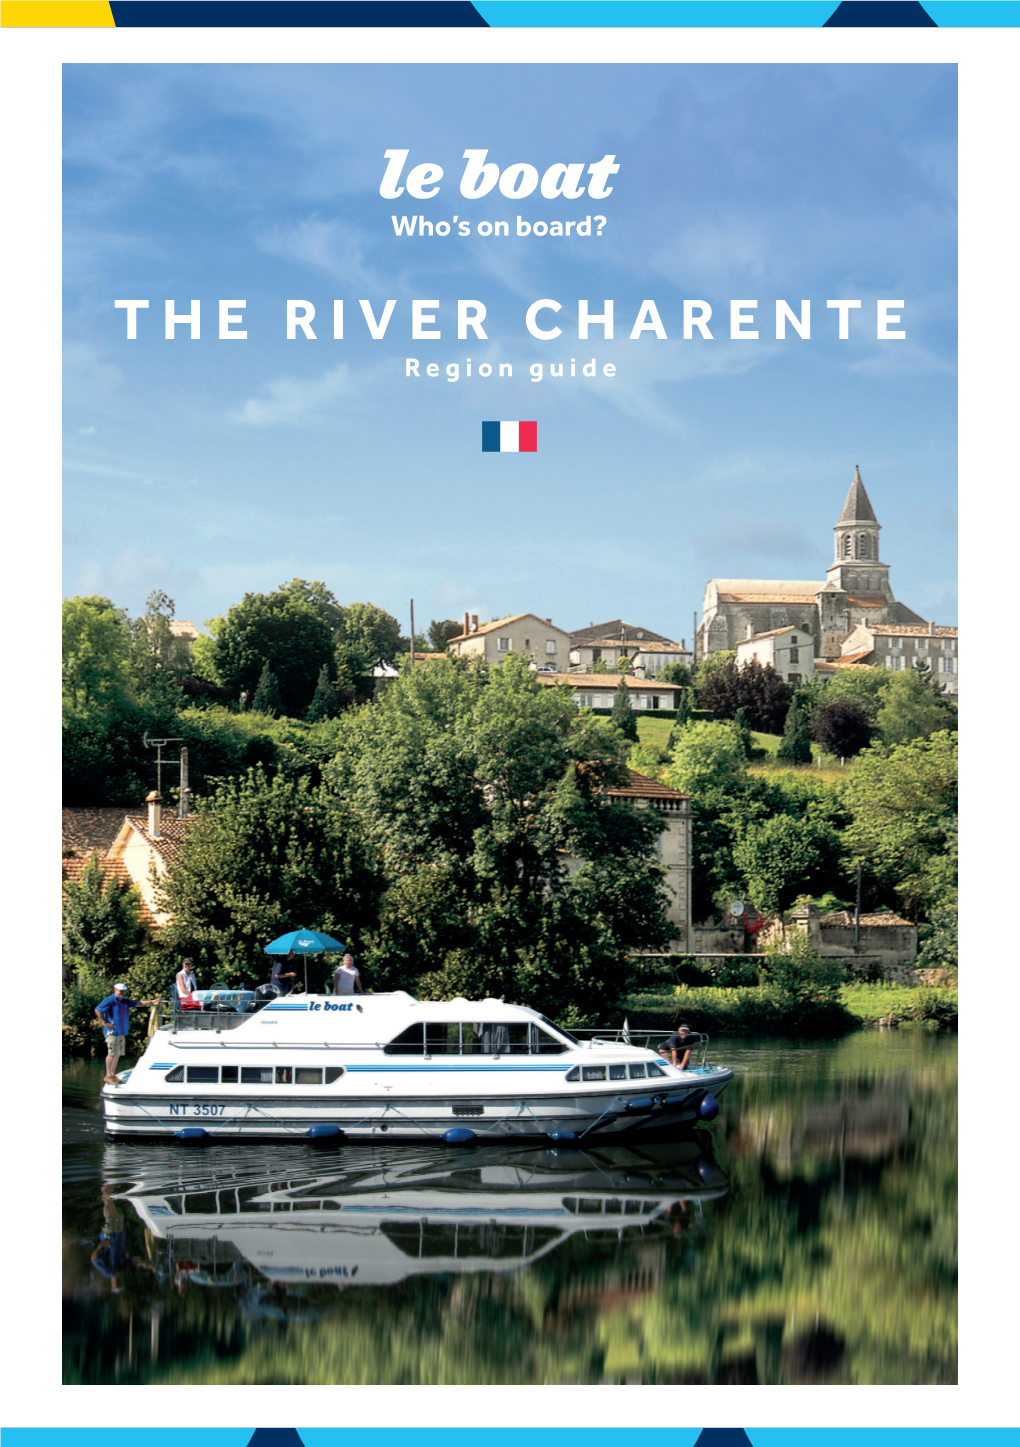 The River Charente